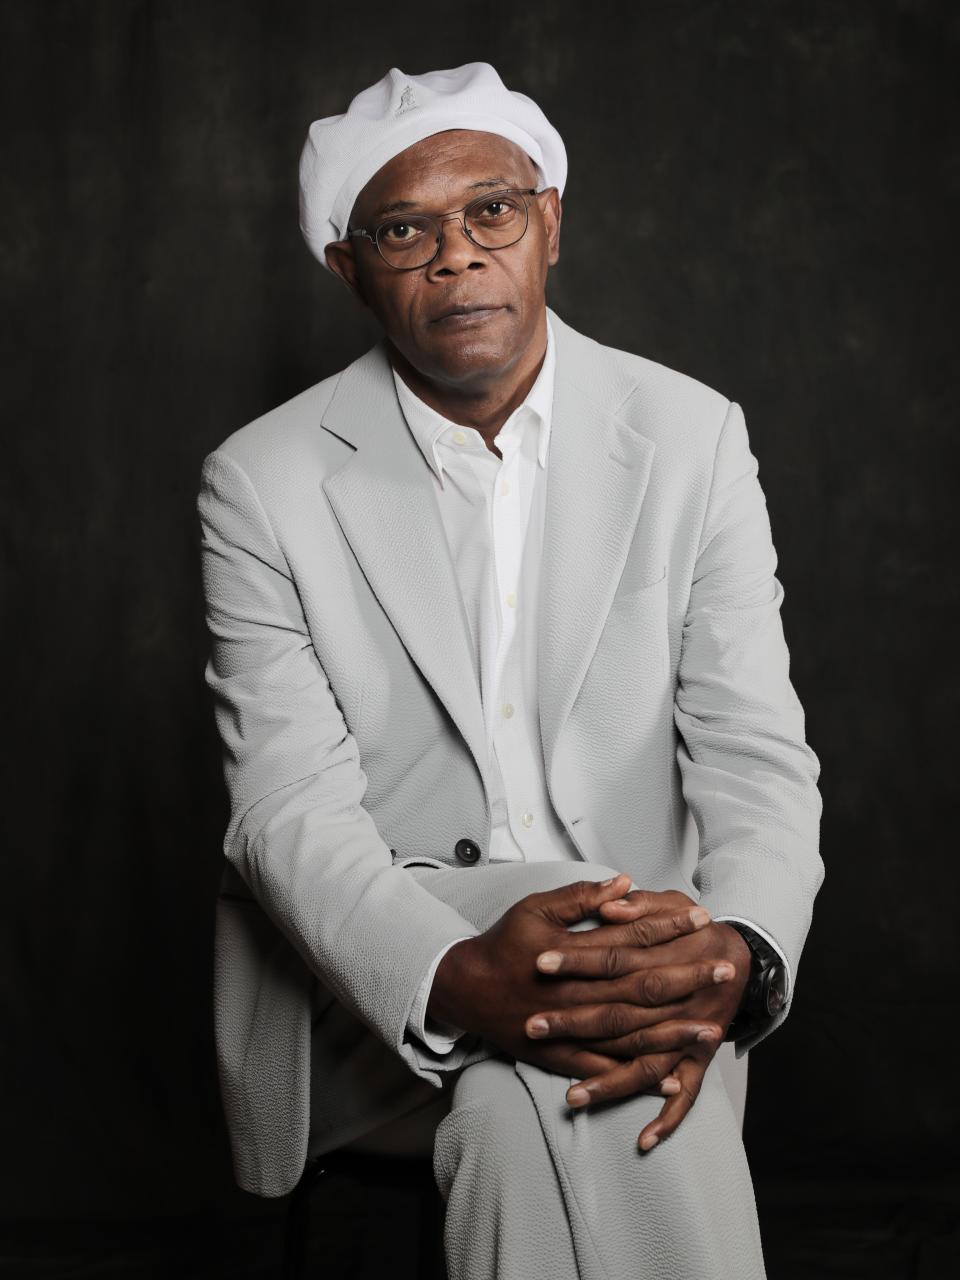 Samuel L Jackson poses at a portrait session during day three of the 13th annual Dubai International Film Festival held at the Madinat Jumeriah Complex on December 9, 2016 in Dubai, United Arab Emirates.